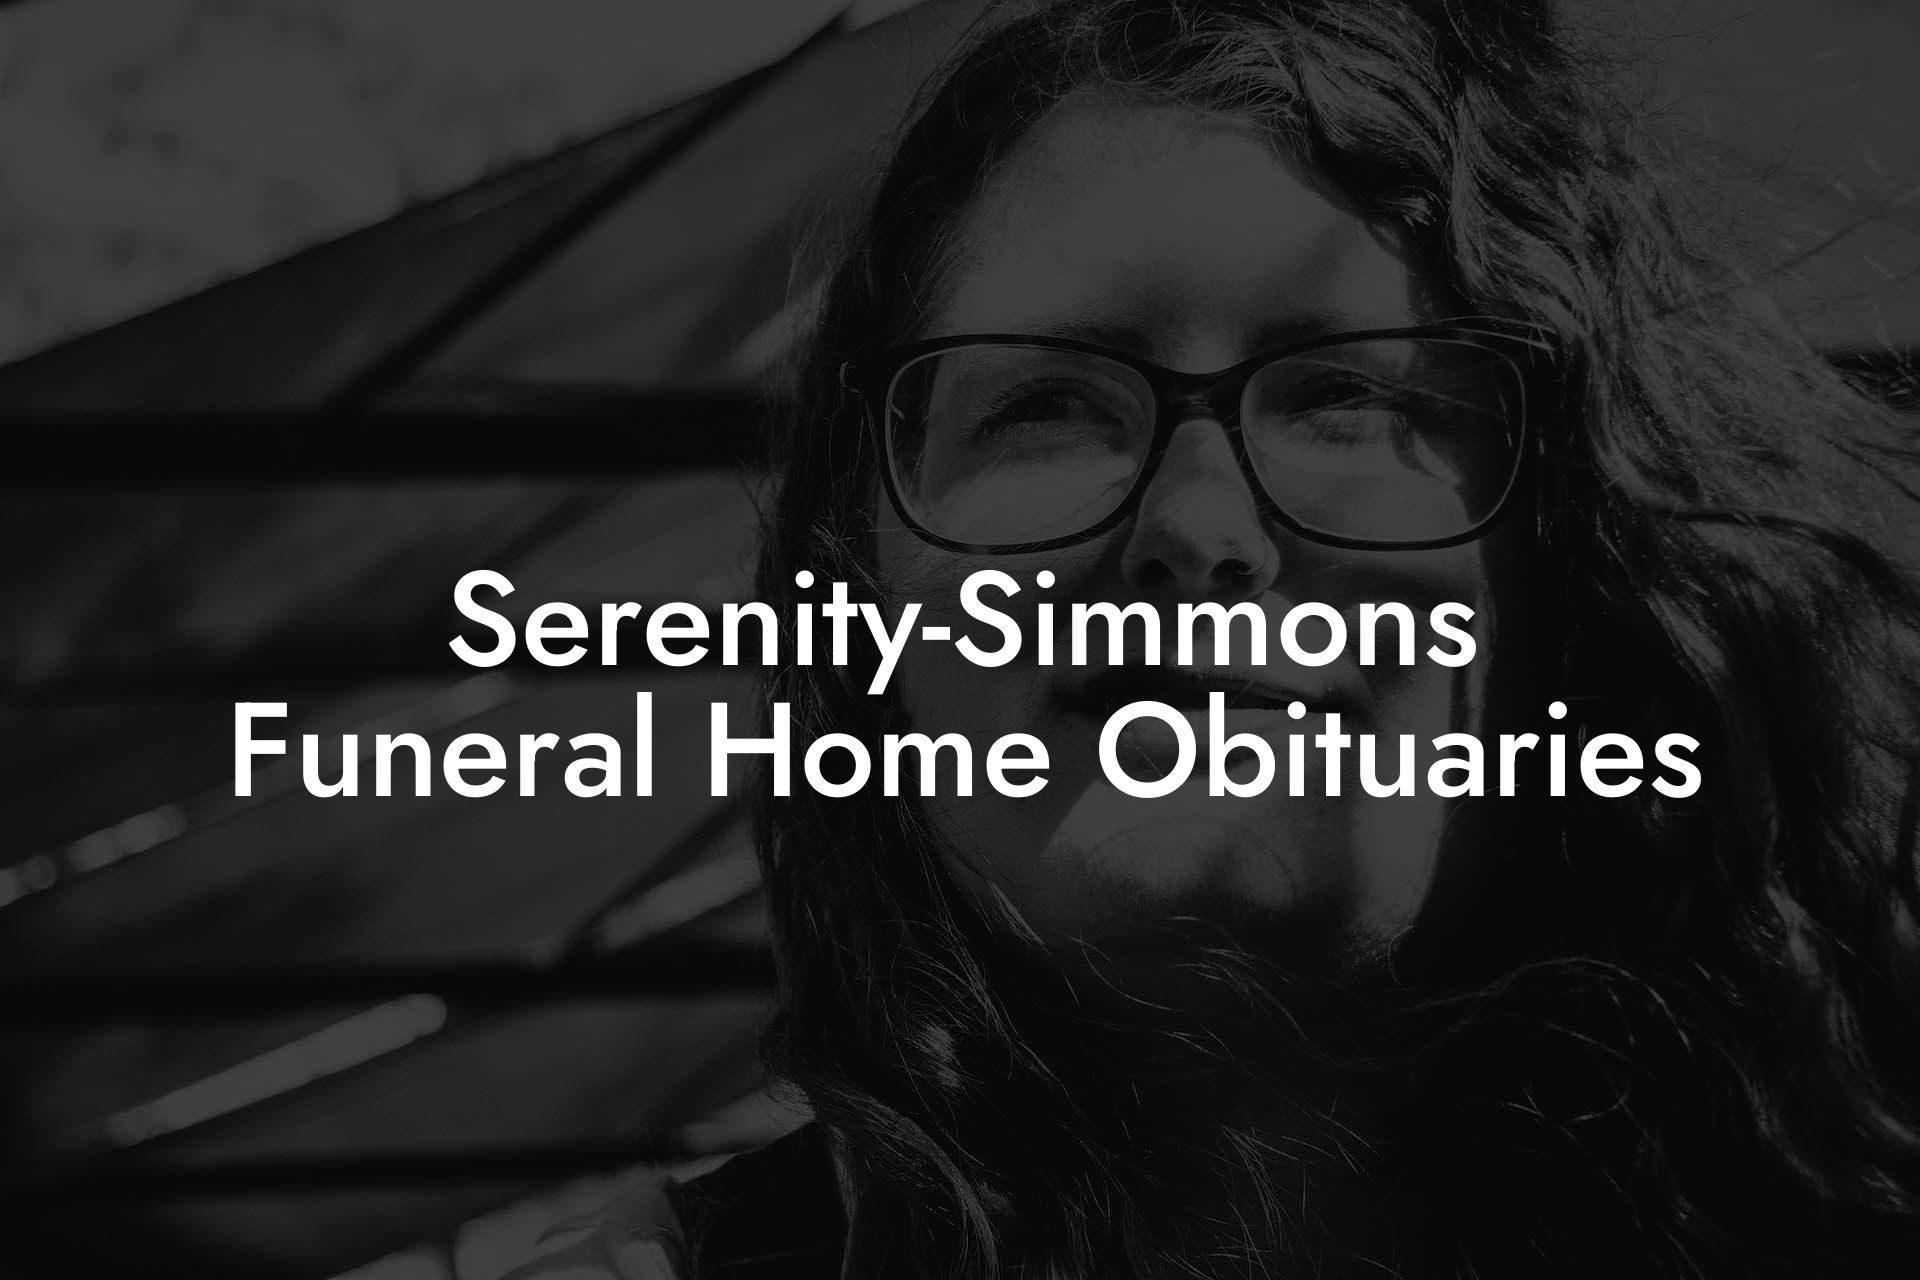 Serenity-Simmons Funeral Home Obituaries